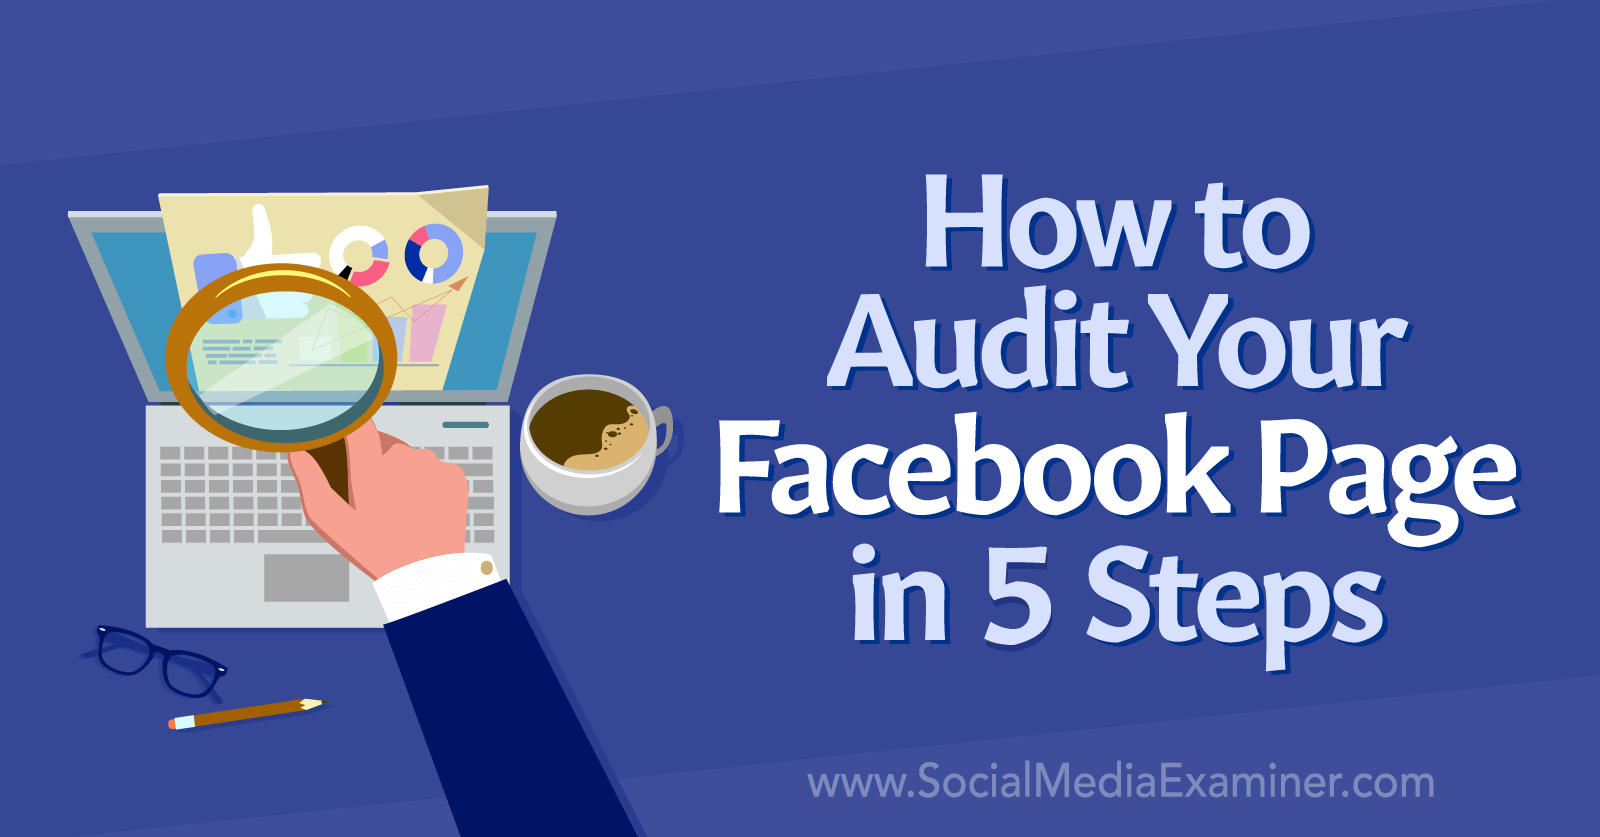 How to Audit Your Facebook Page in 5 Steps-Social Media Examiner